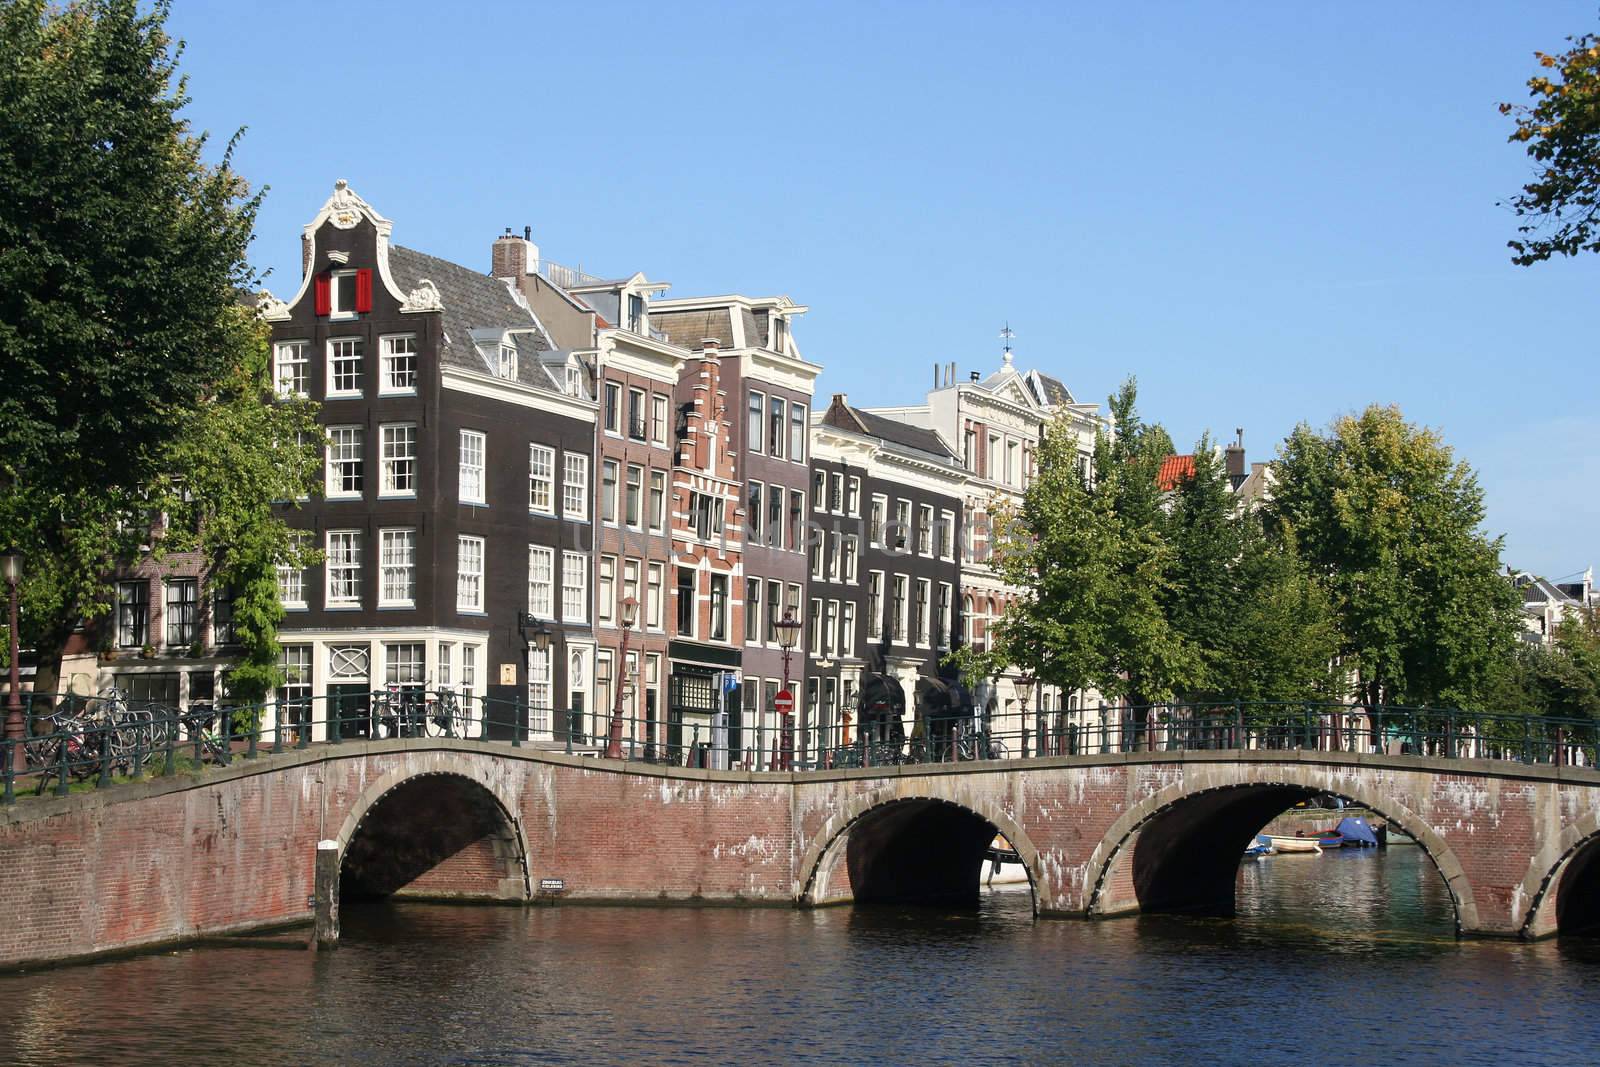 Historical bridge over canal in Amsterdam, Holland